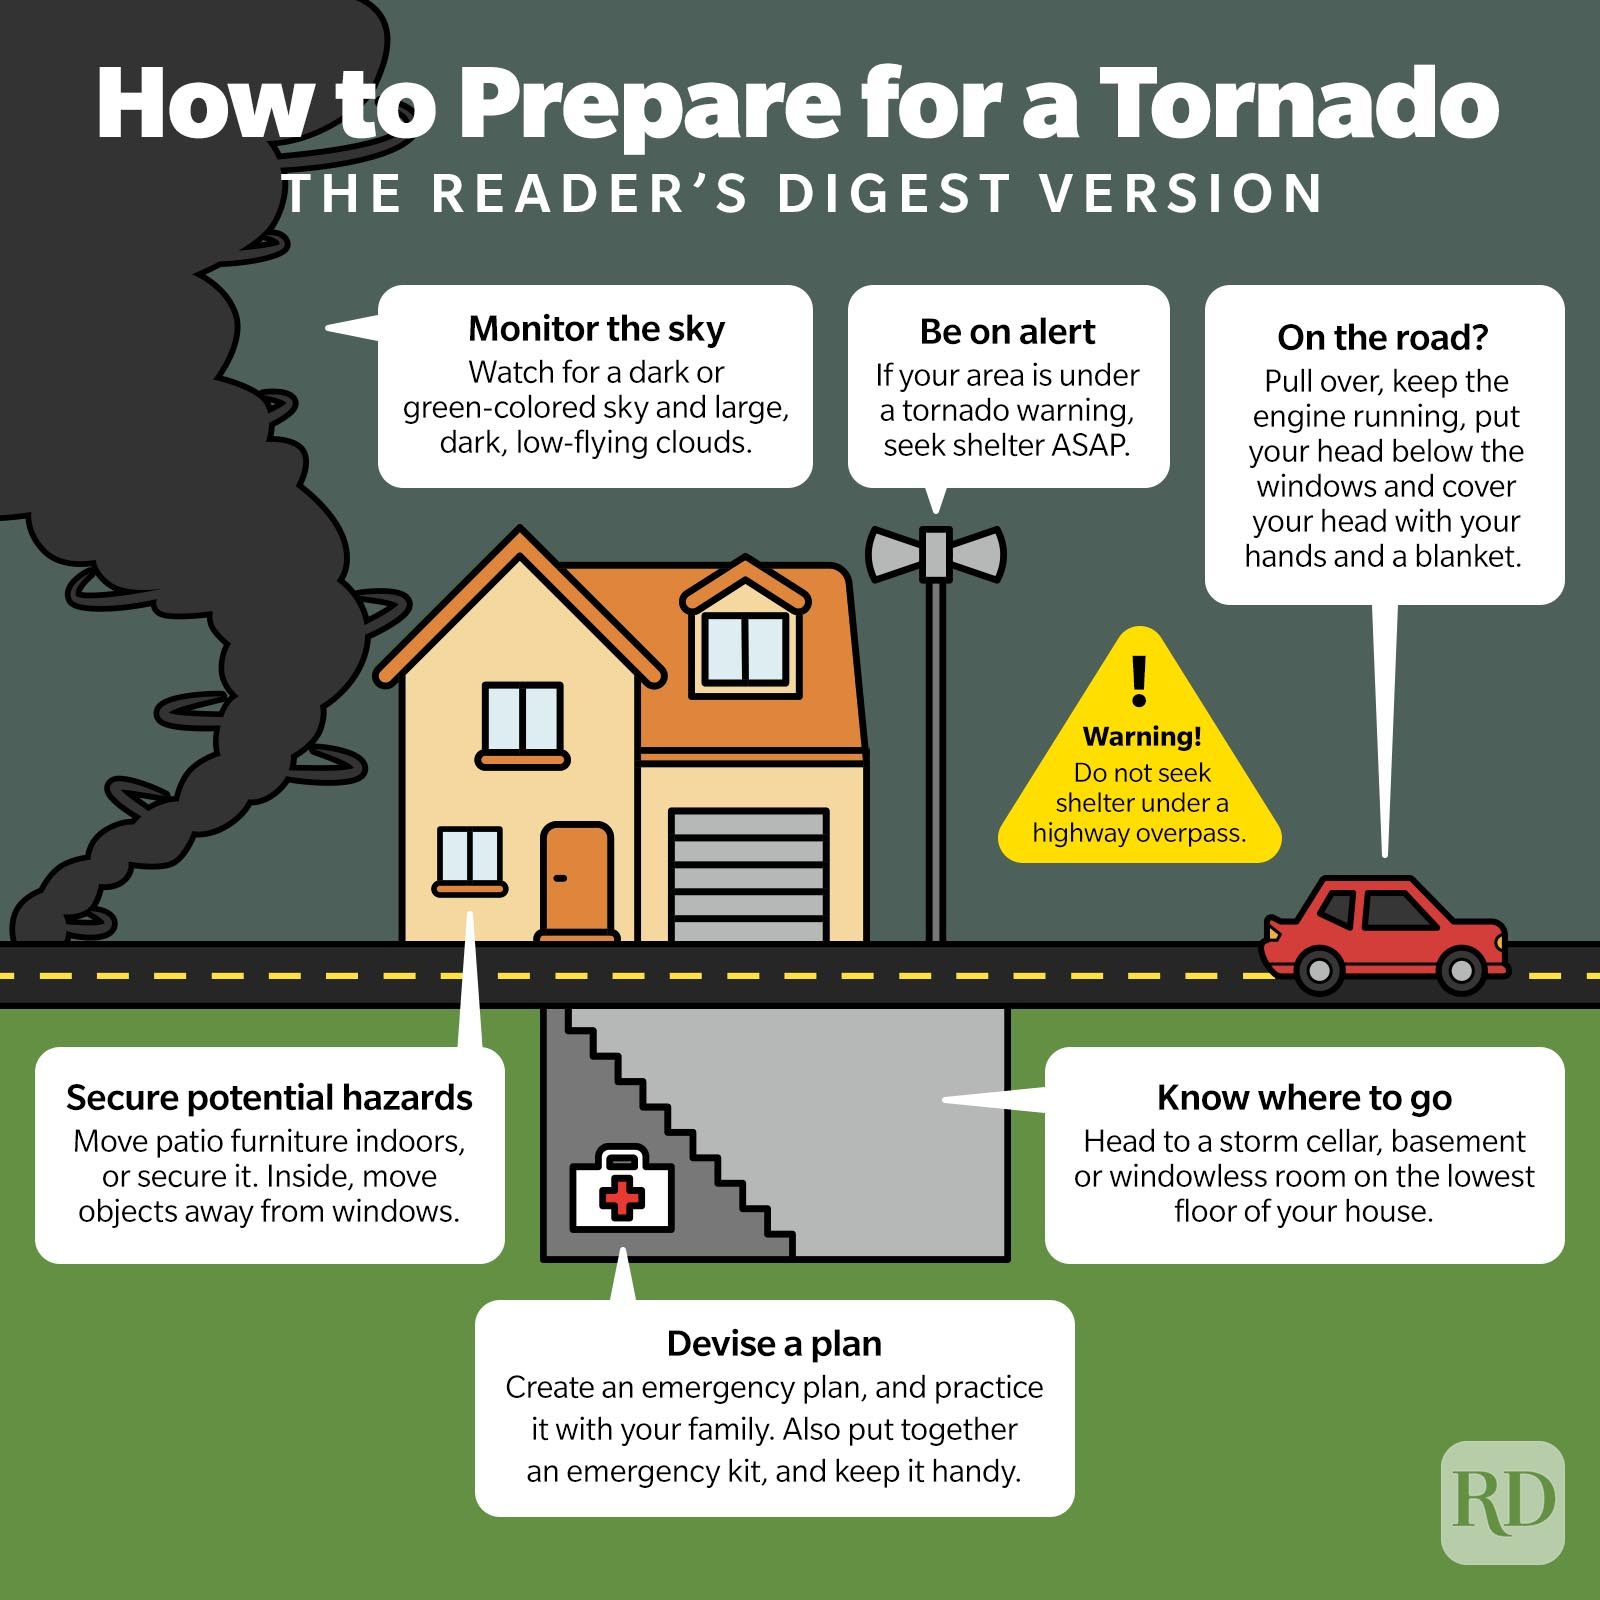 https://www.rd.com/wp-content/uploads/2022/11/How-to-Prepare-for-a-Tornado-Infographic-GettyImages3.jpg?fit=700%2C700